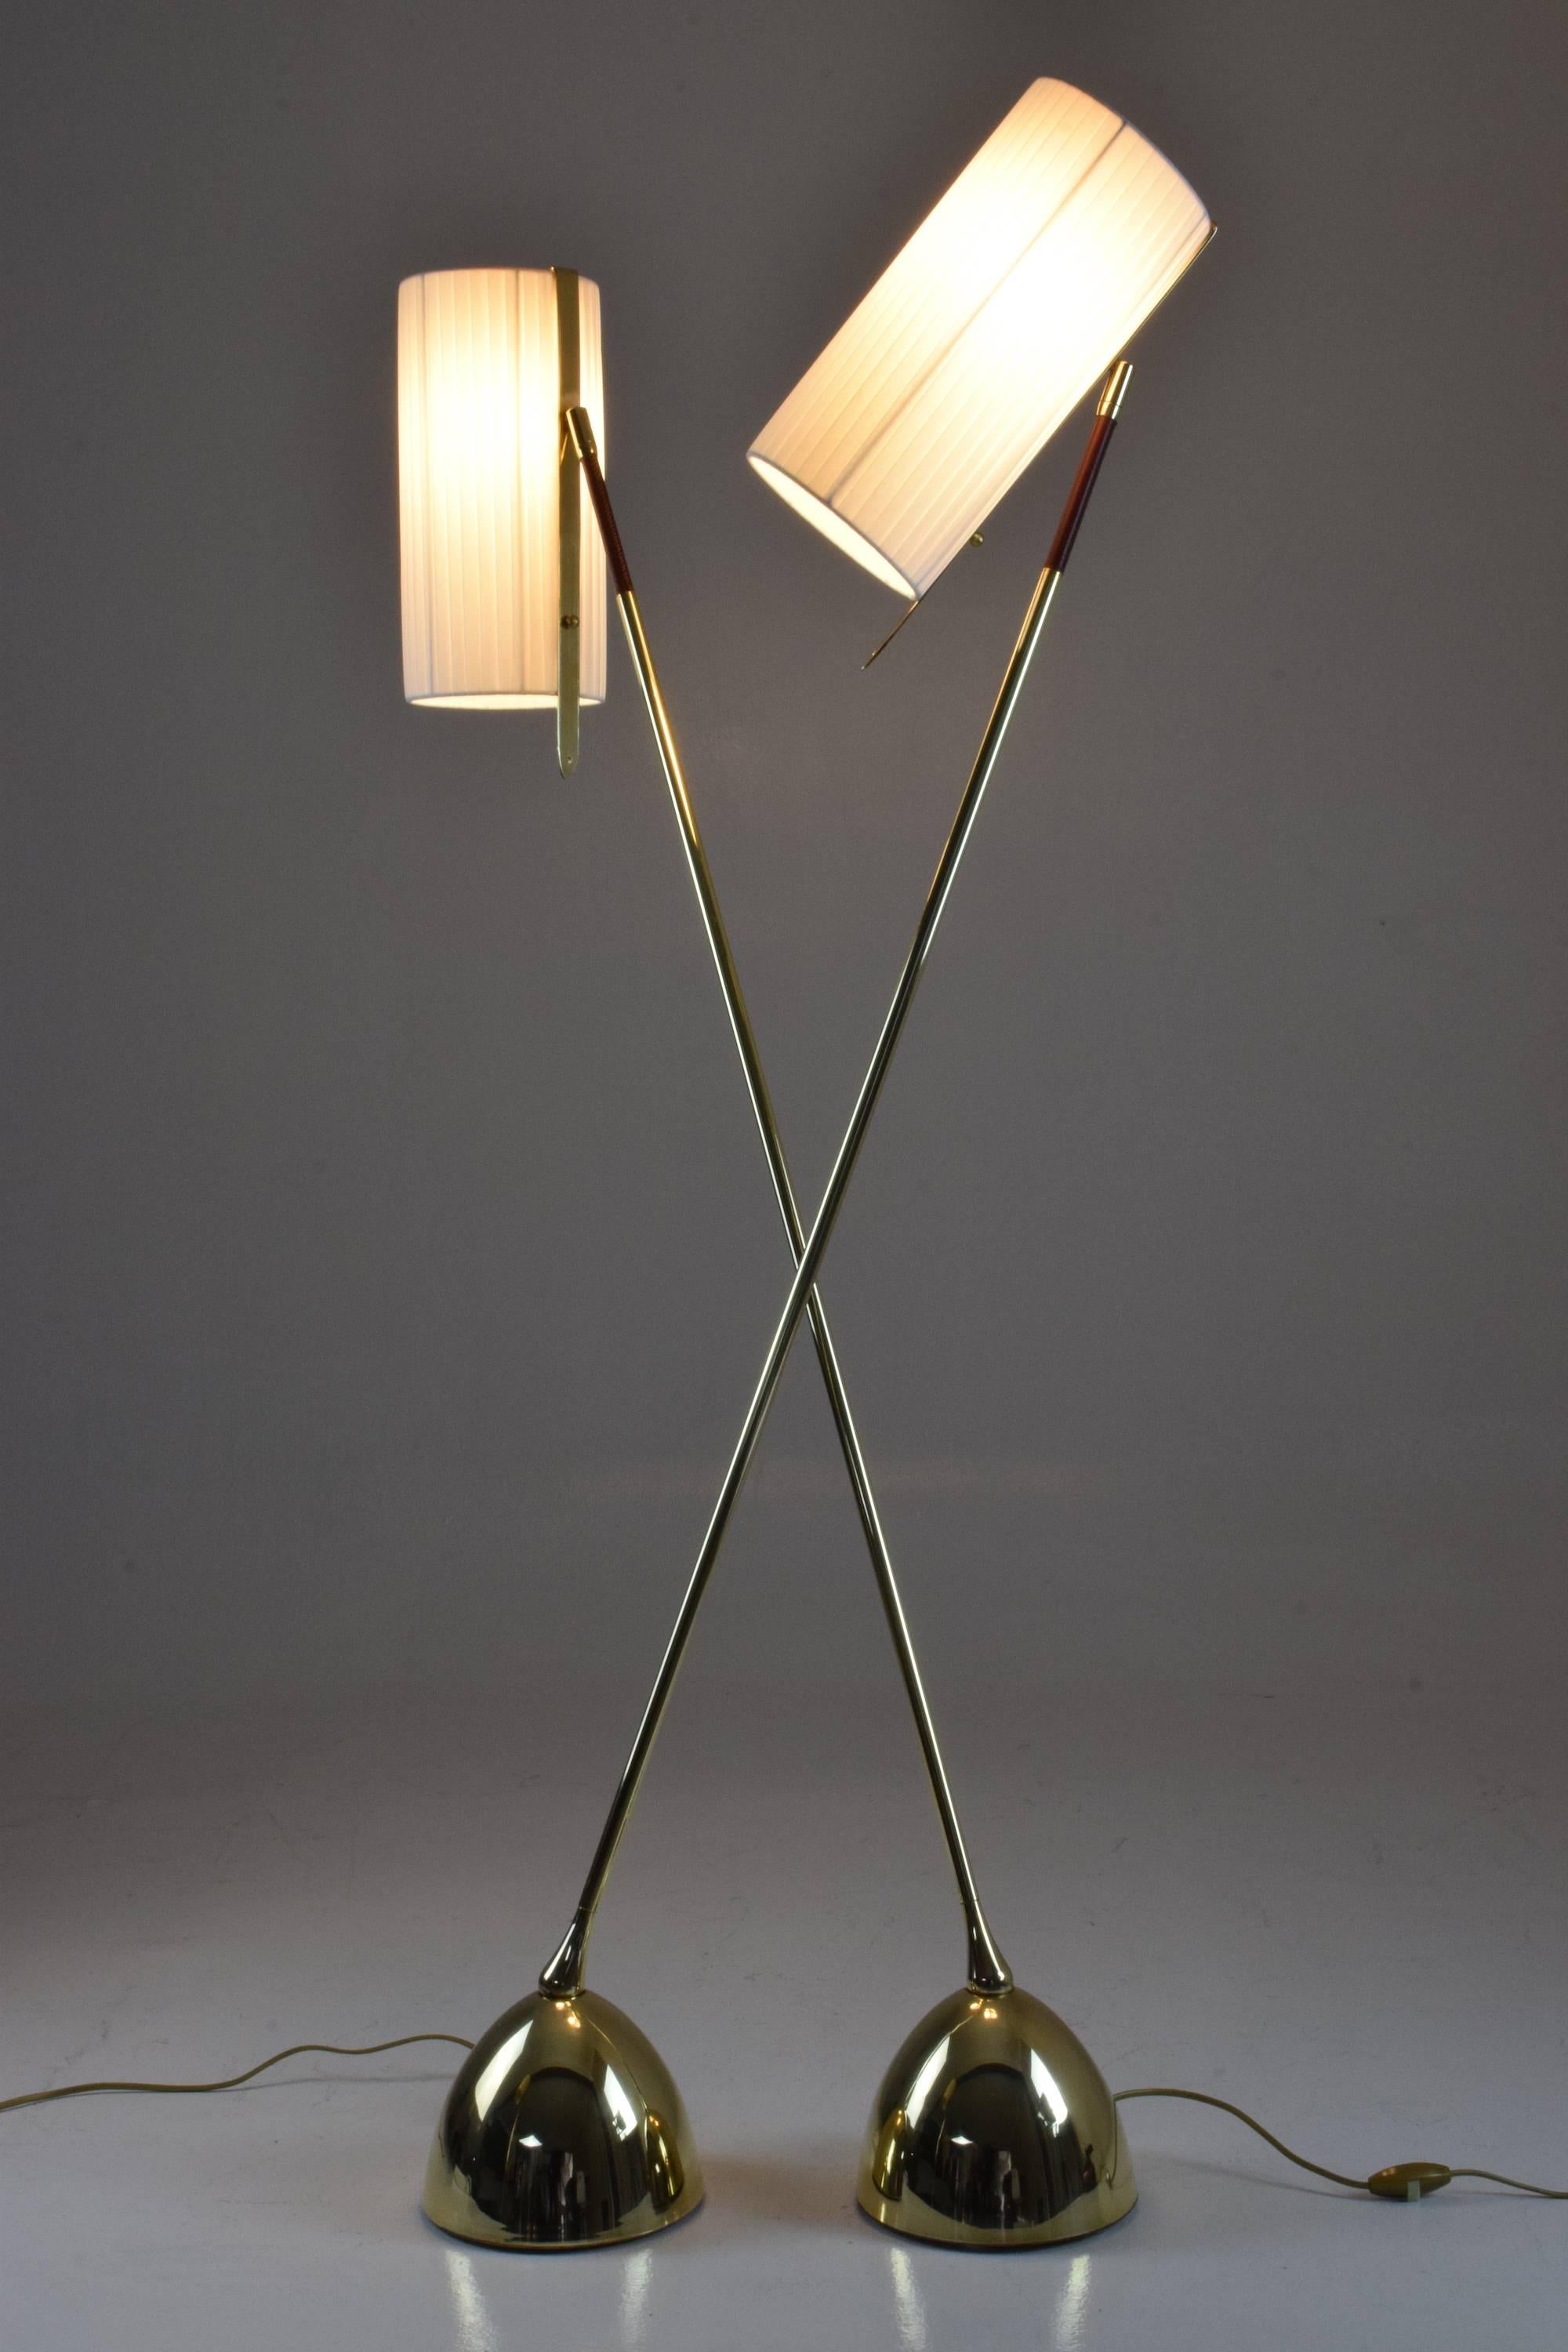 Equilibrium
When opposite forces are in total harmony 

Contemporary handcrafted floor lamp composed of a solid polished brass structure which rotates 360 degrees at the base with our signature pear shaped joint. The top is adorned with a hand